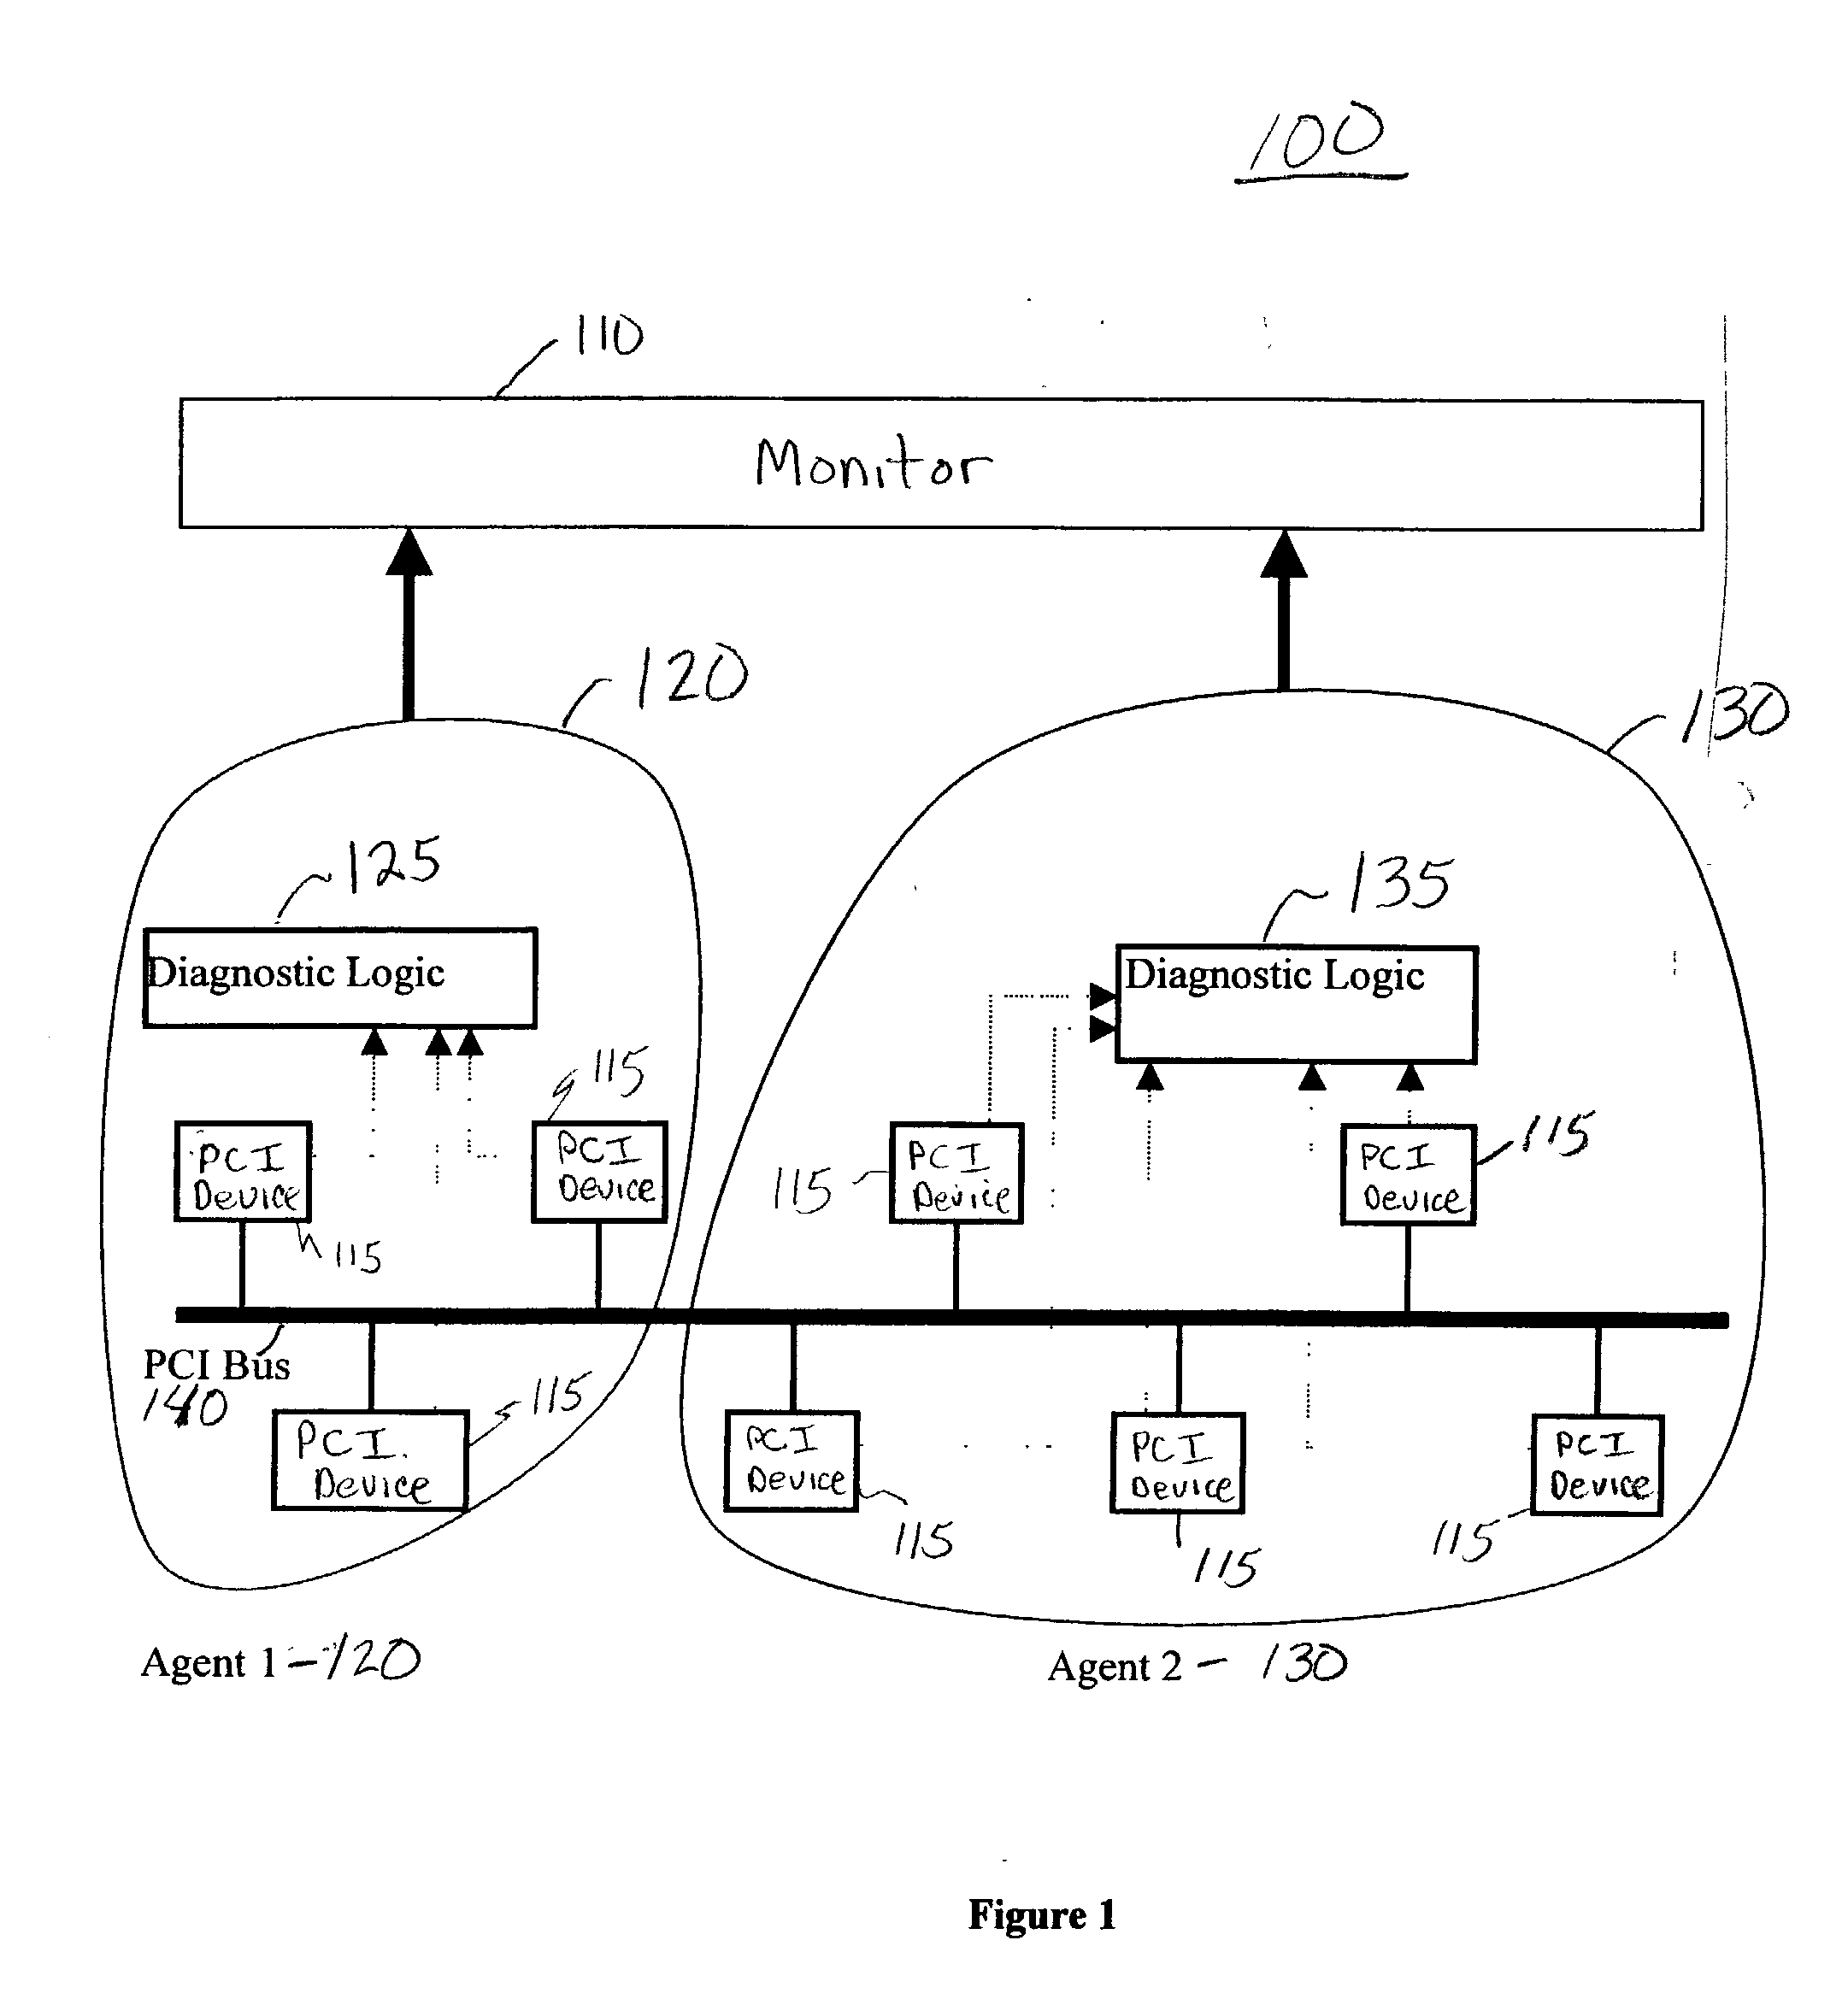 Method and system for diagnostic approach for fault isolation at device level on peripheral component interconnect (PCI) bus